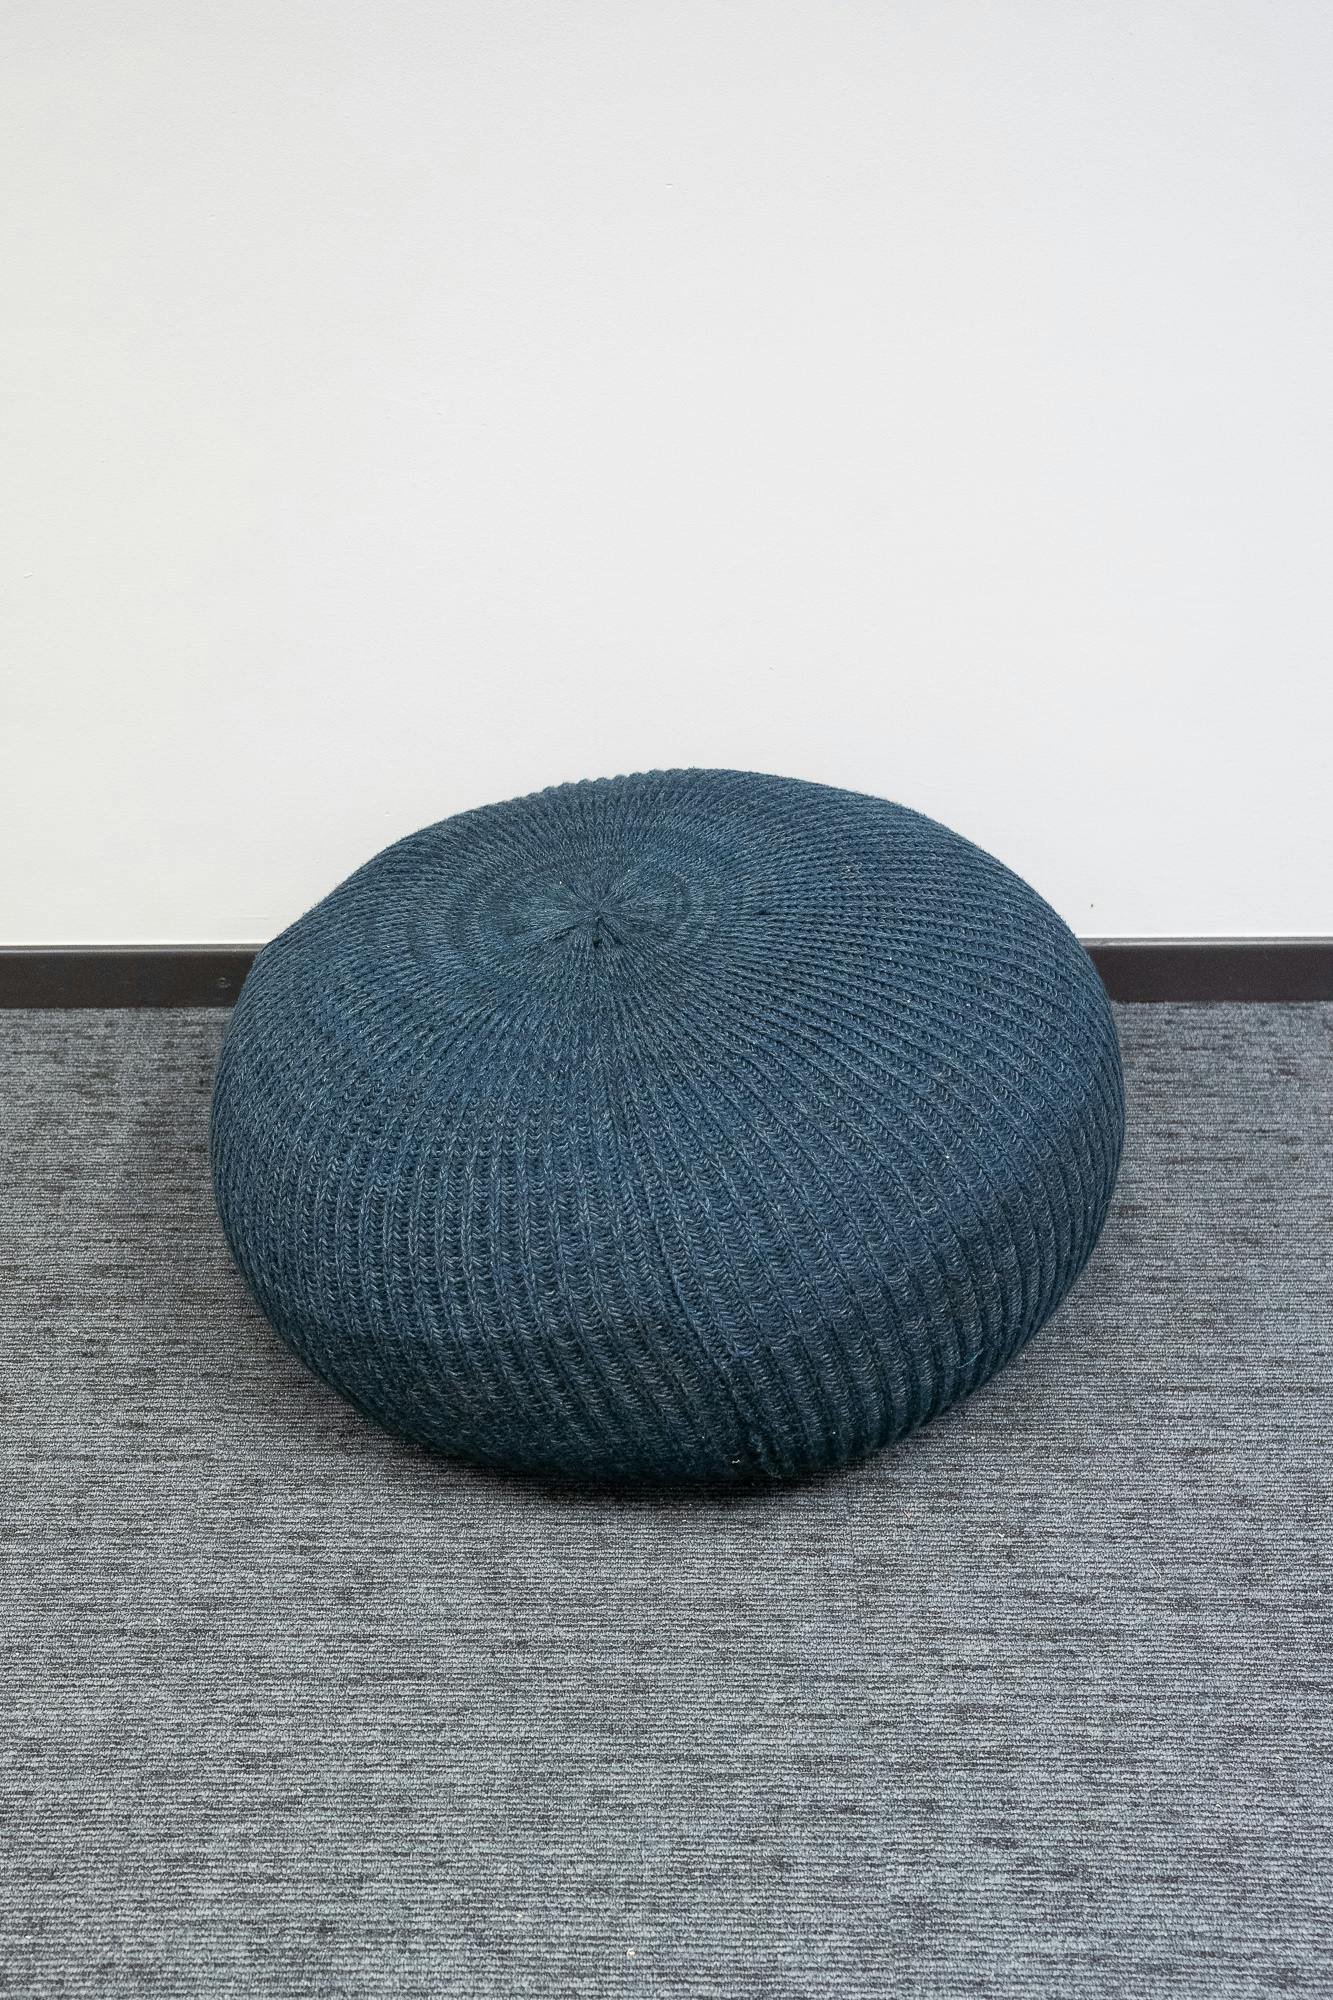 Round blue wool pouffe - Second hand quality "Chairs" - Relieve Furniture